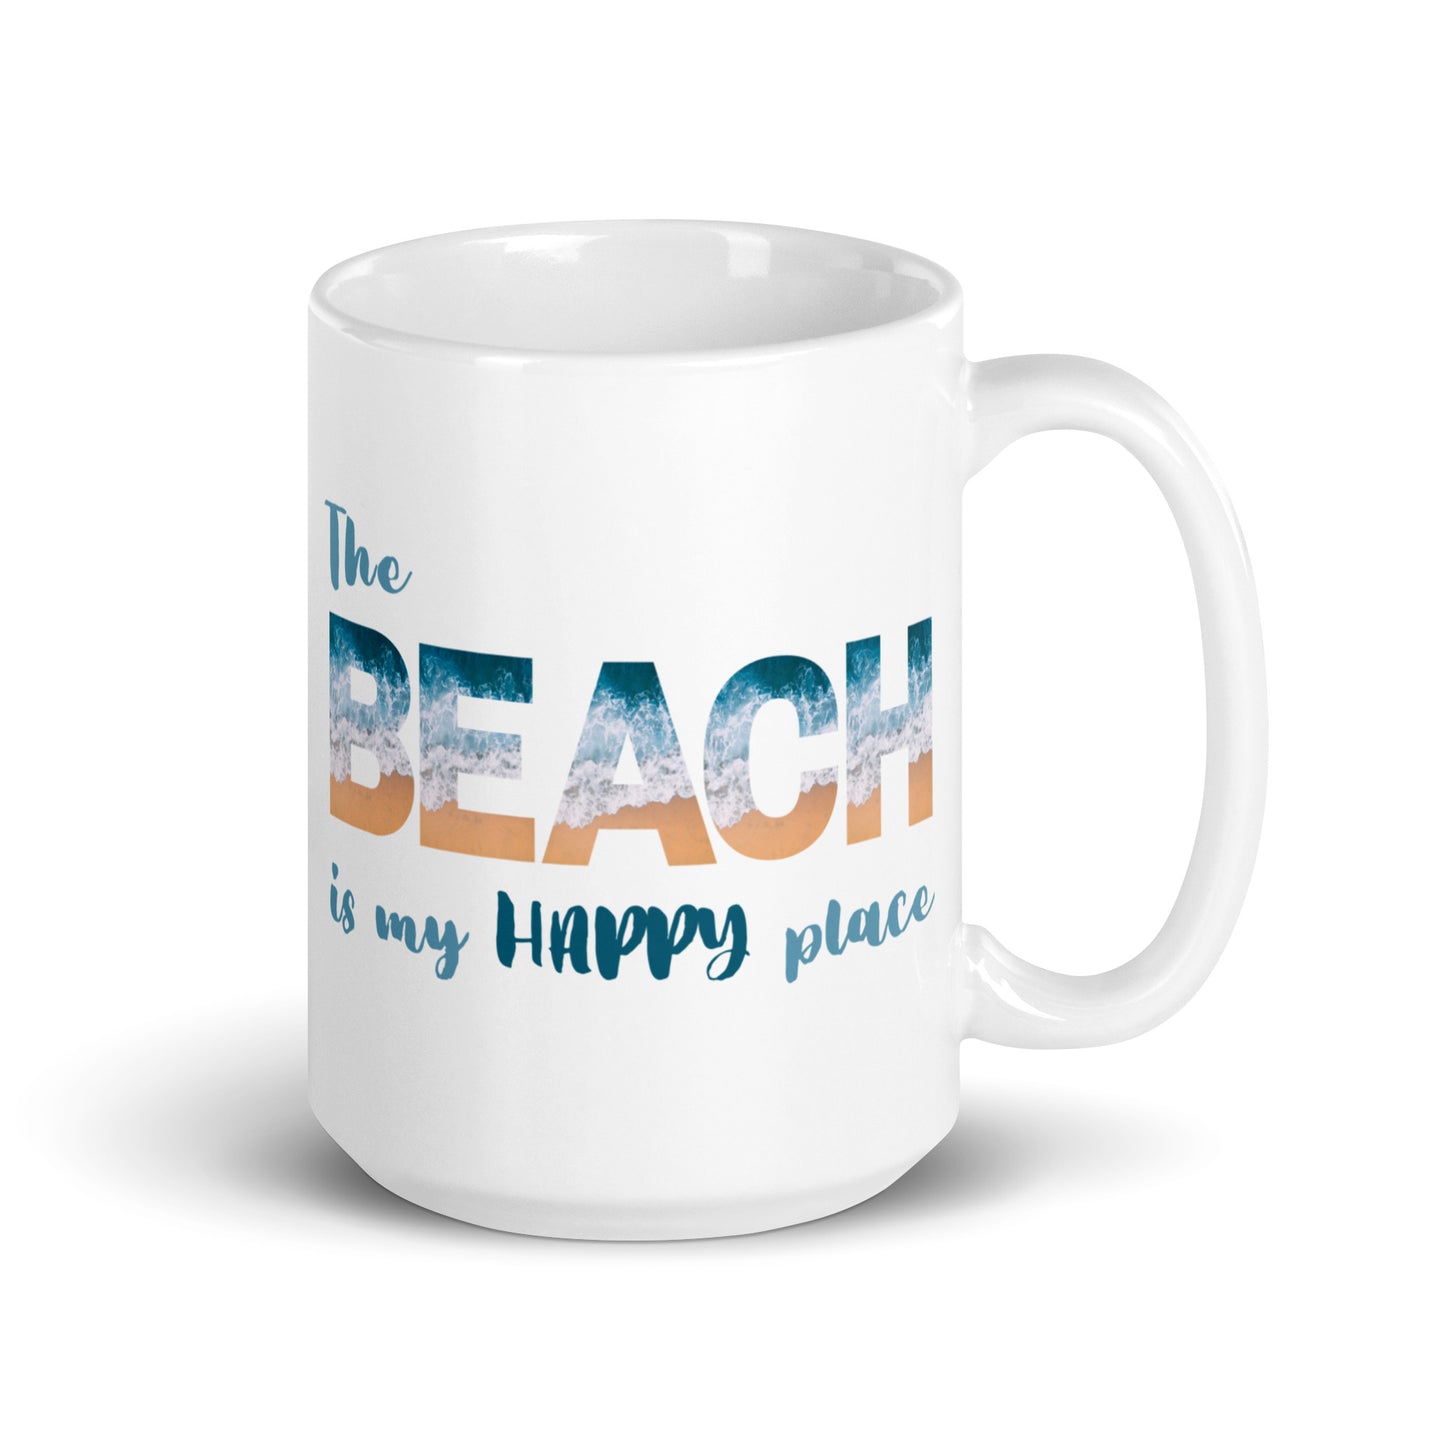 White Glossy Mug - The Beach is My Happy Place (Dk Green)